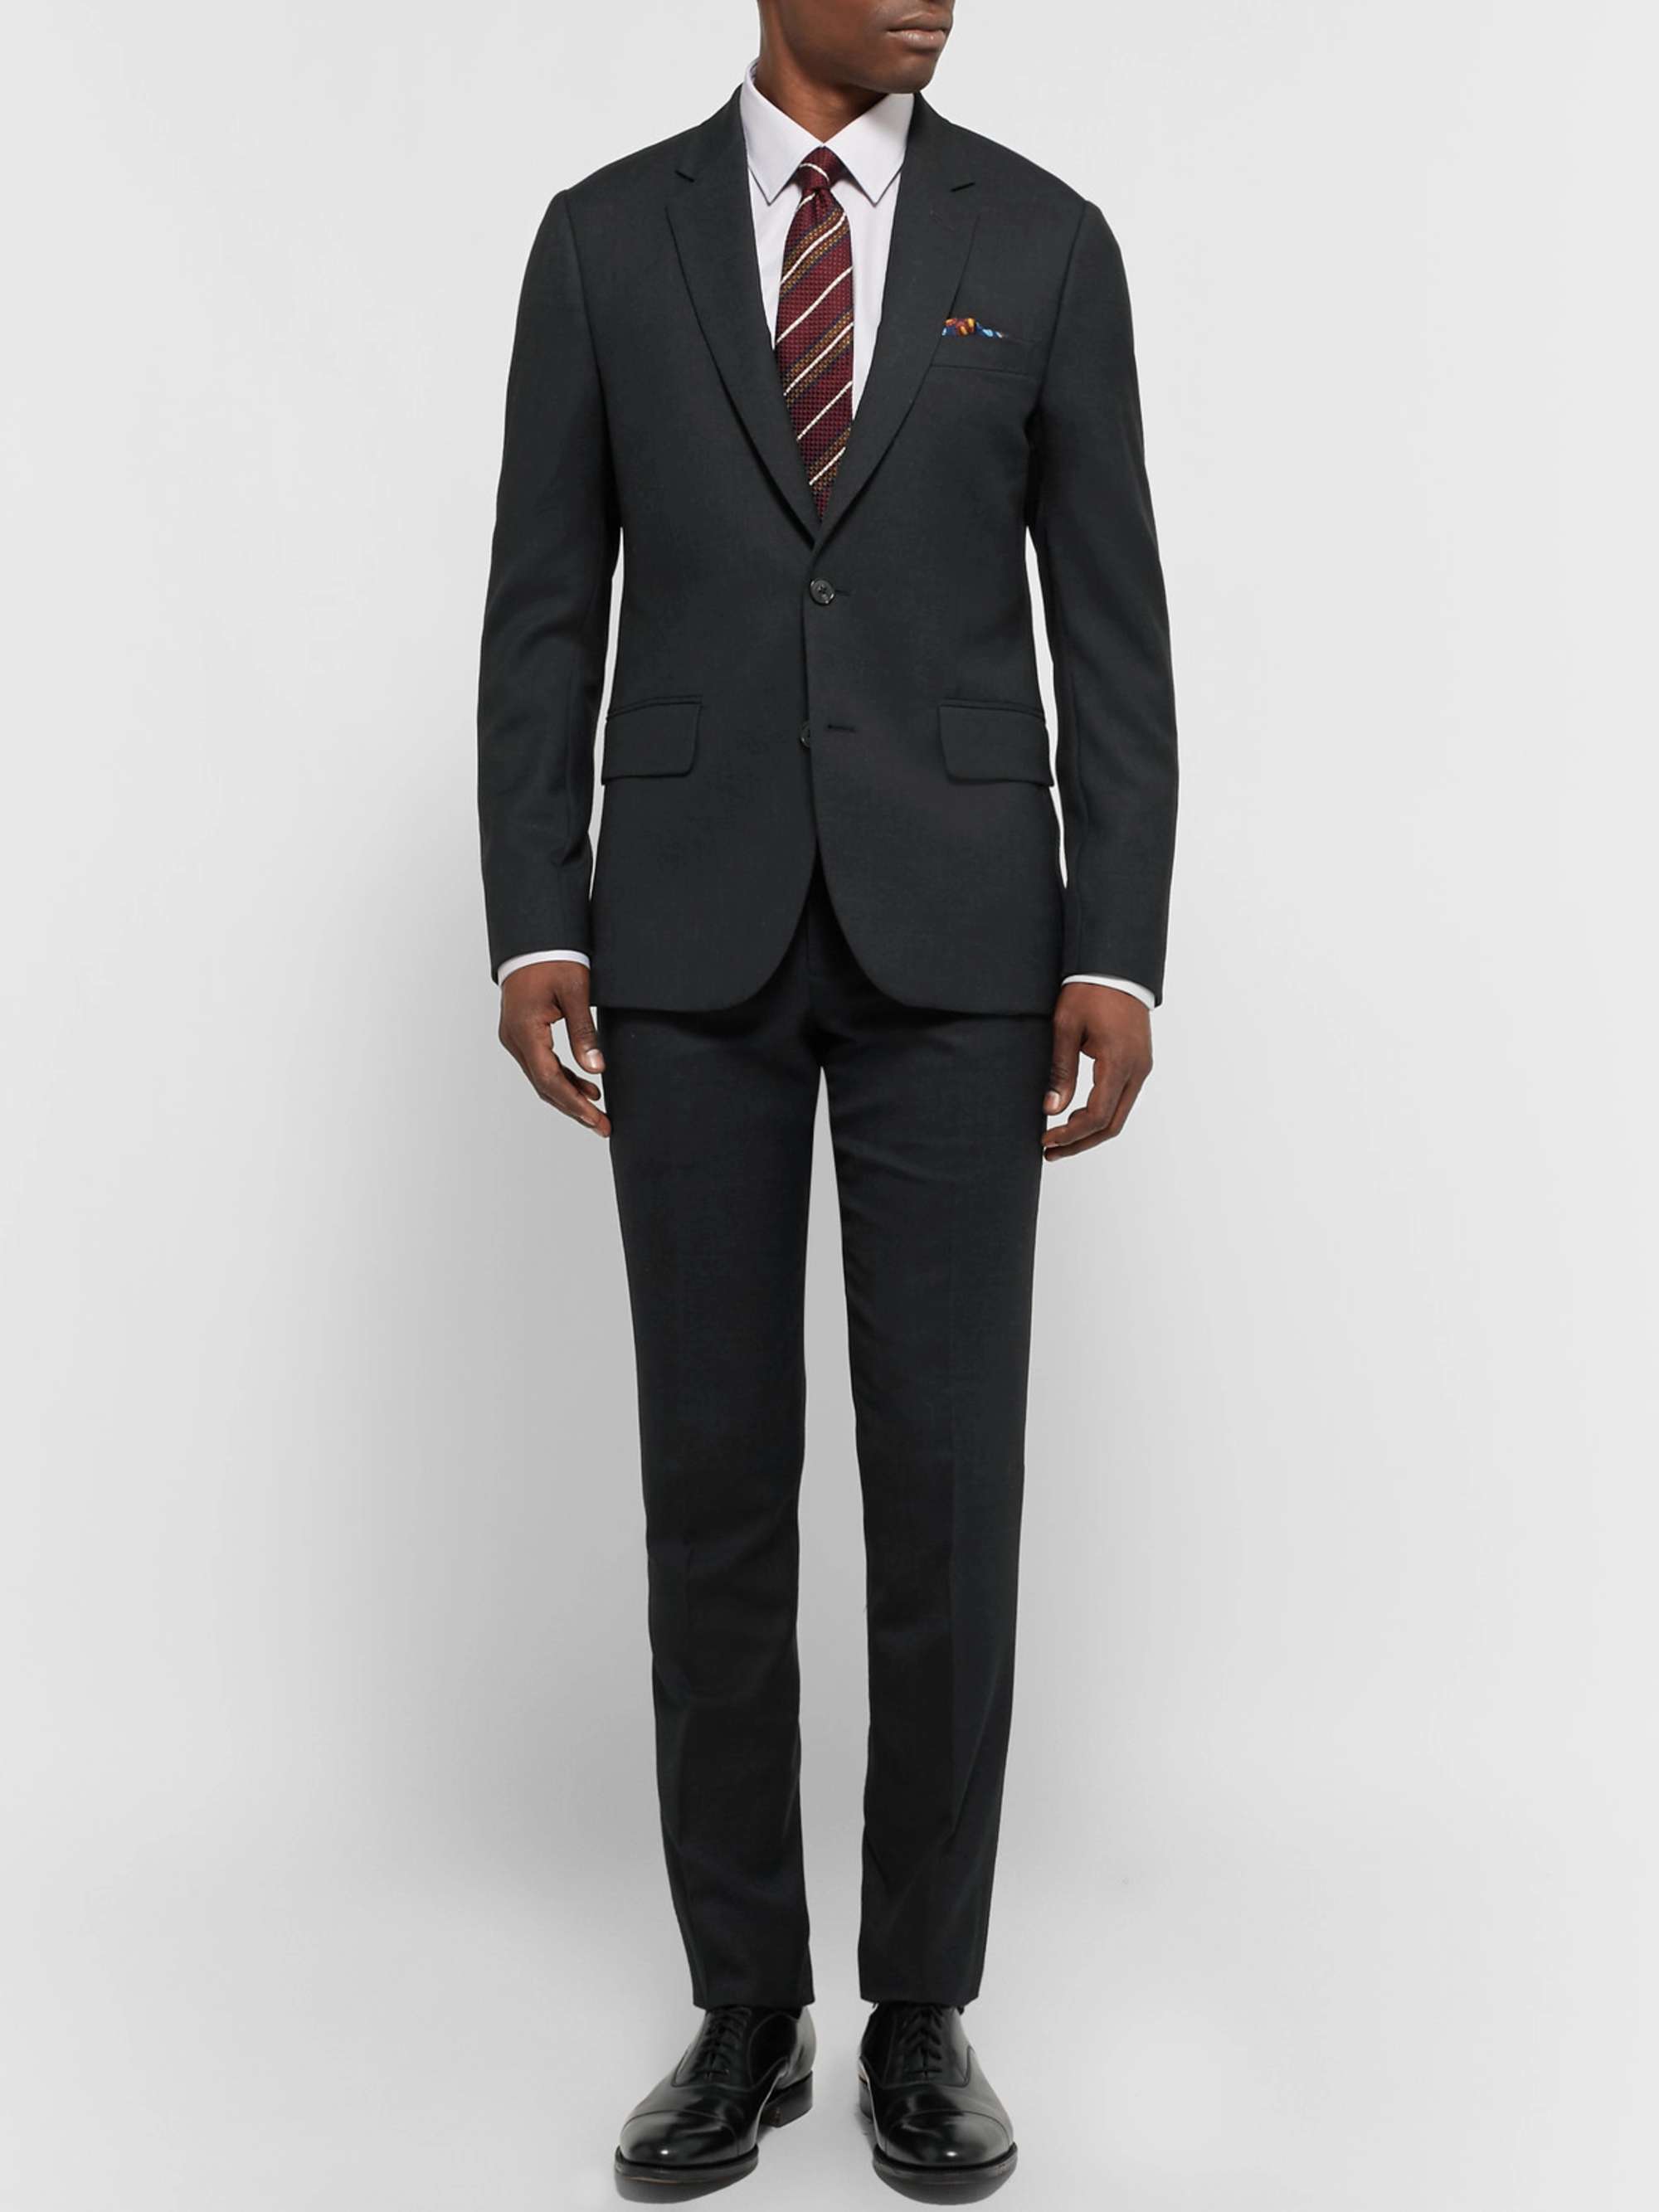 Charcoal Grey A Suit To Travel In Soho Slim-Fit Wool Suit | PAUL SMITH | MR  PORTER